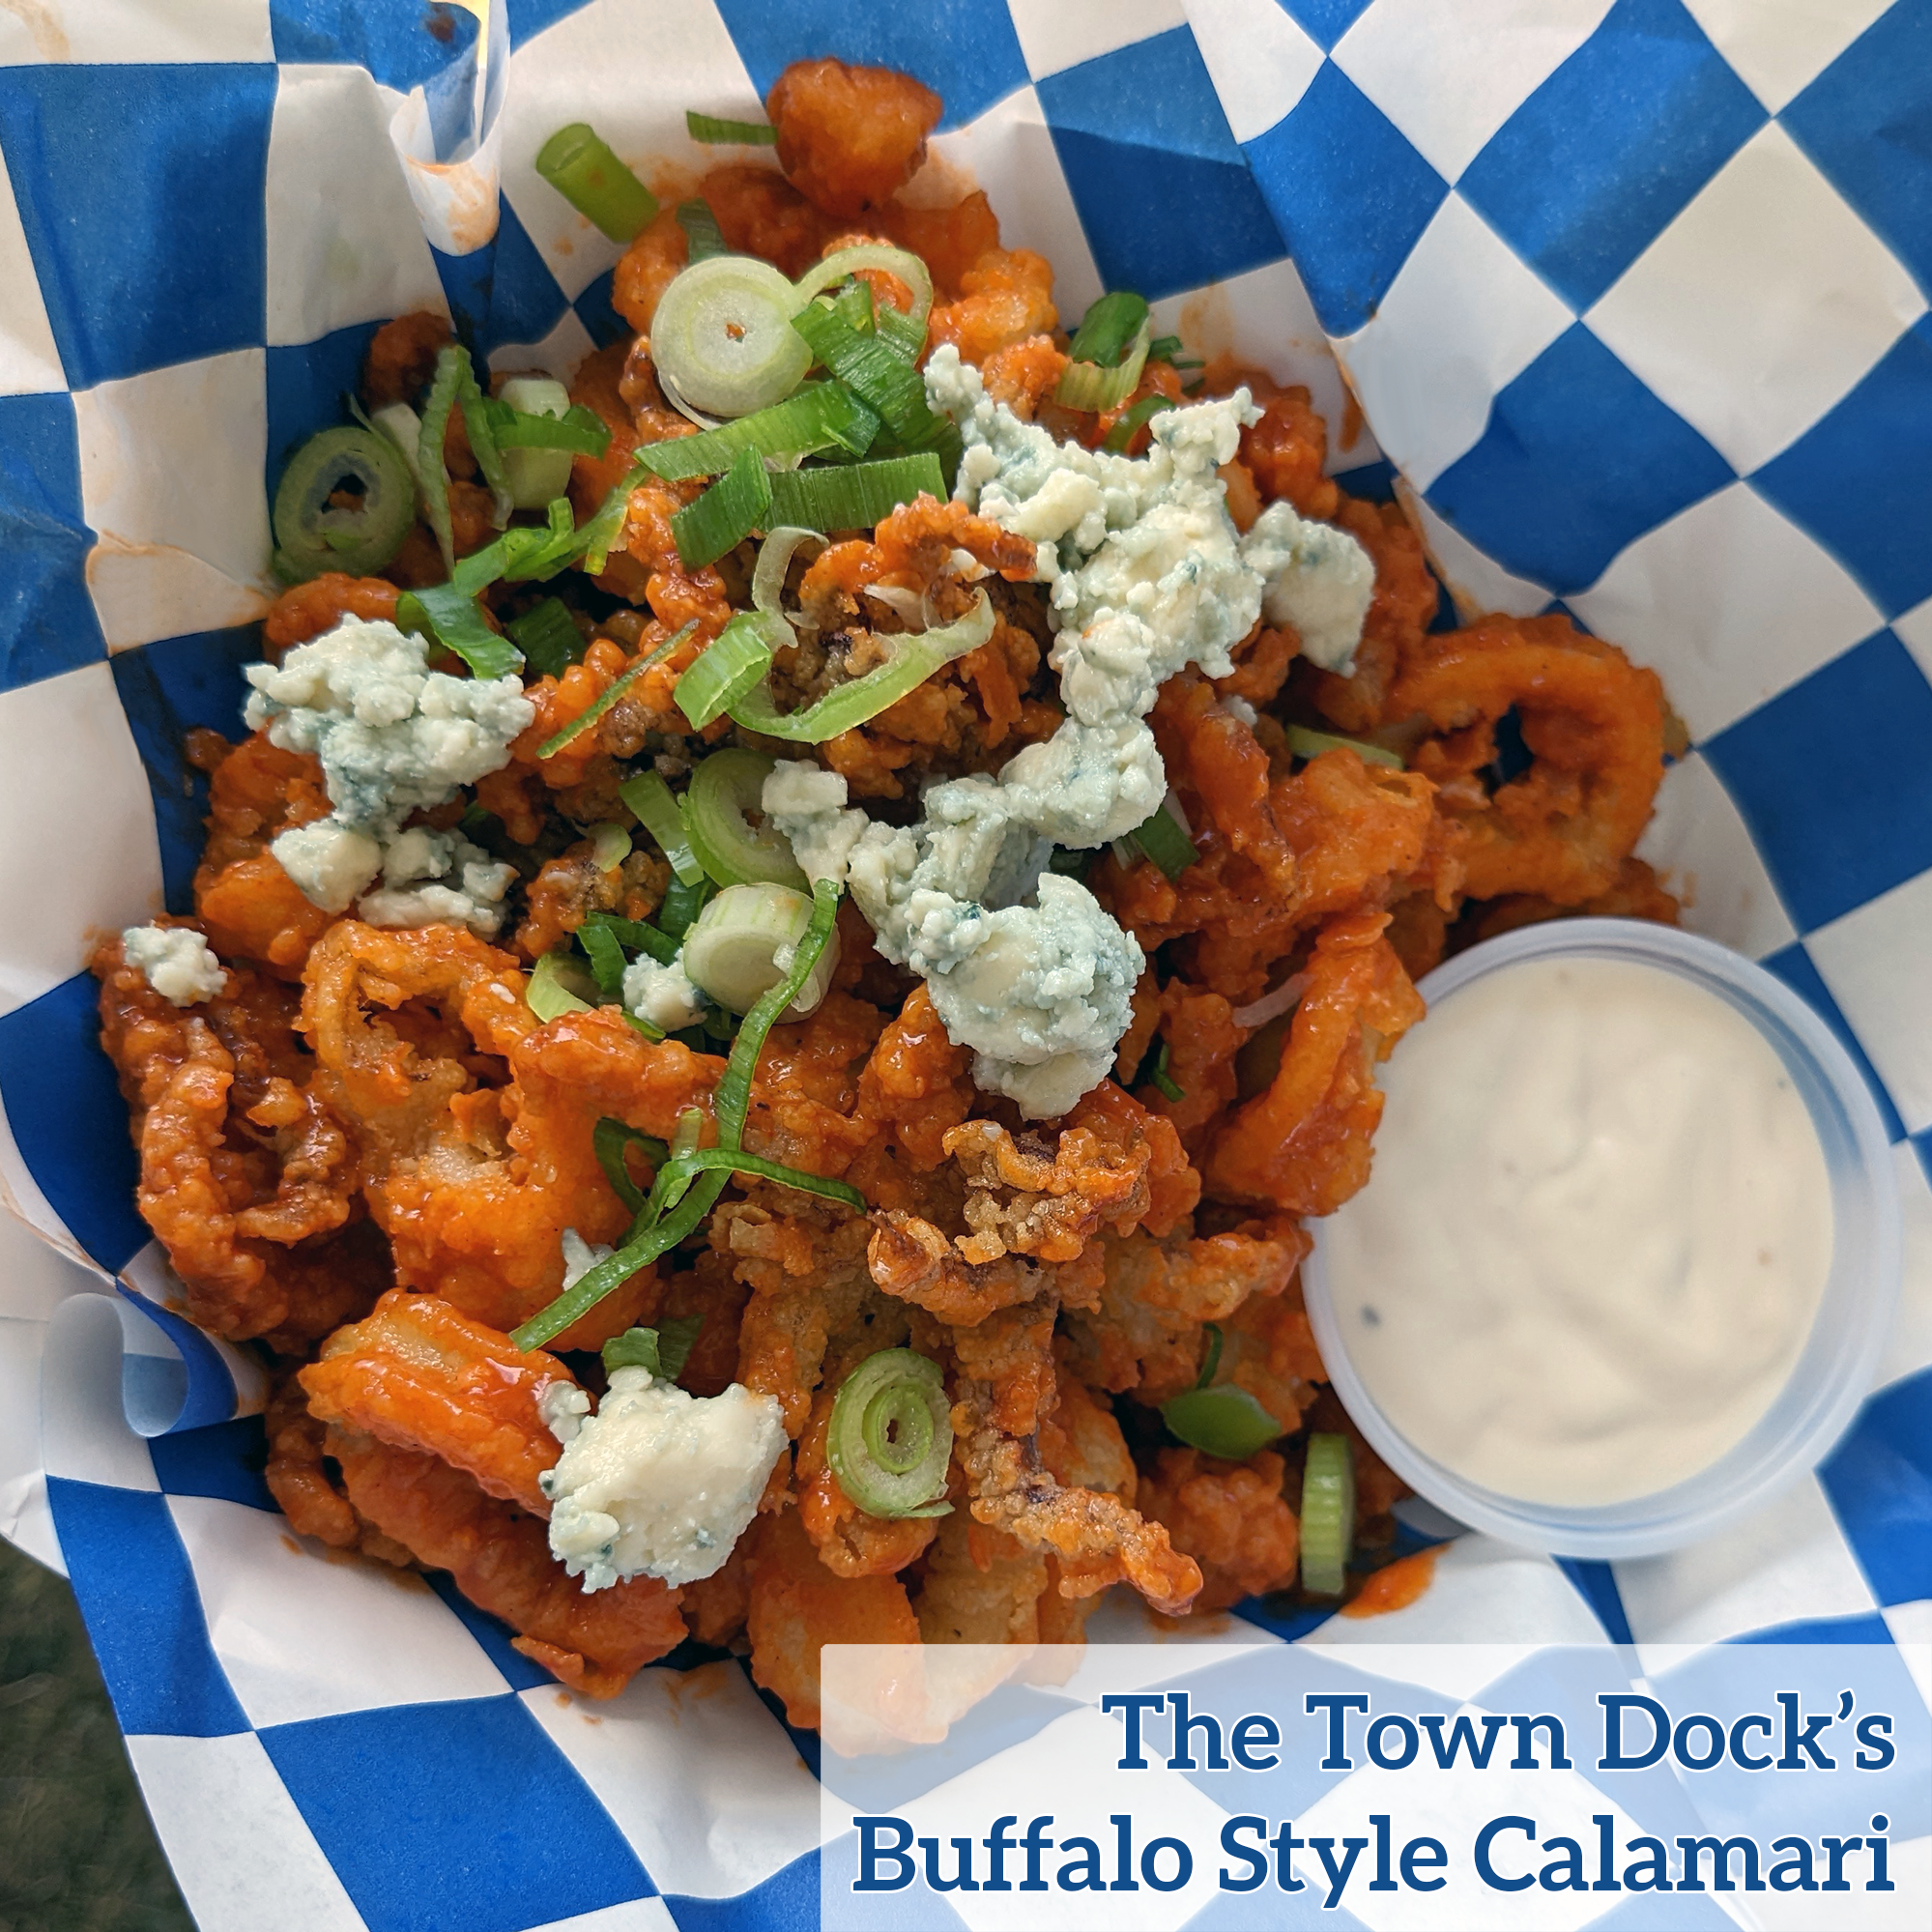 Fried calamari rings and tentacles, tossed in buffalo sauce, topped with blue cheese and scallion